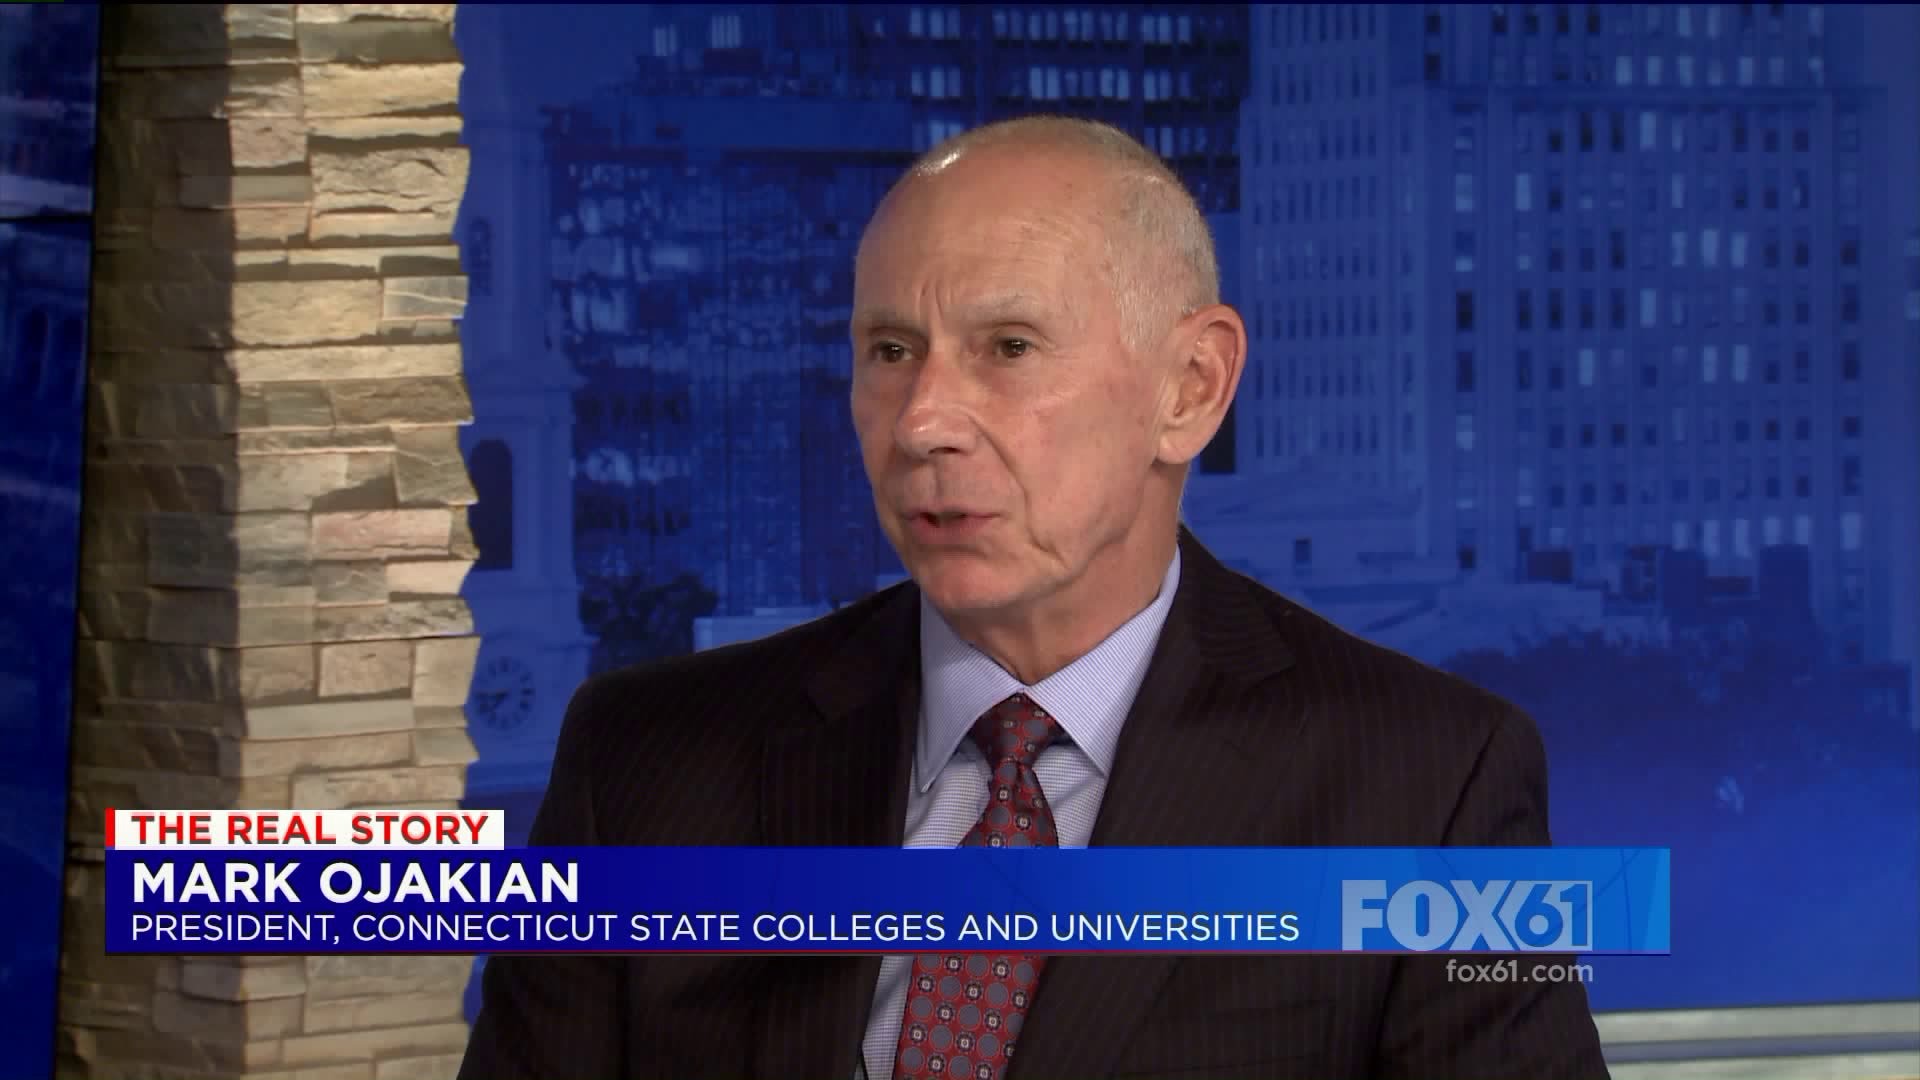 Real Story pt 1 - Ojakian on CSCU tuition